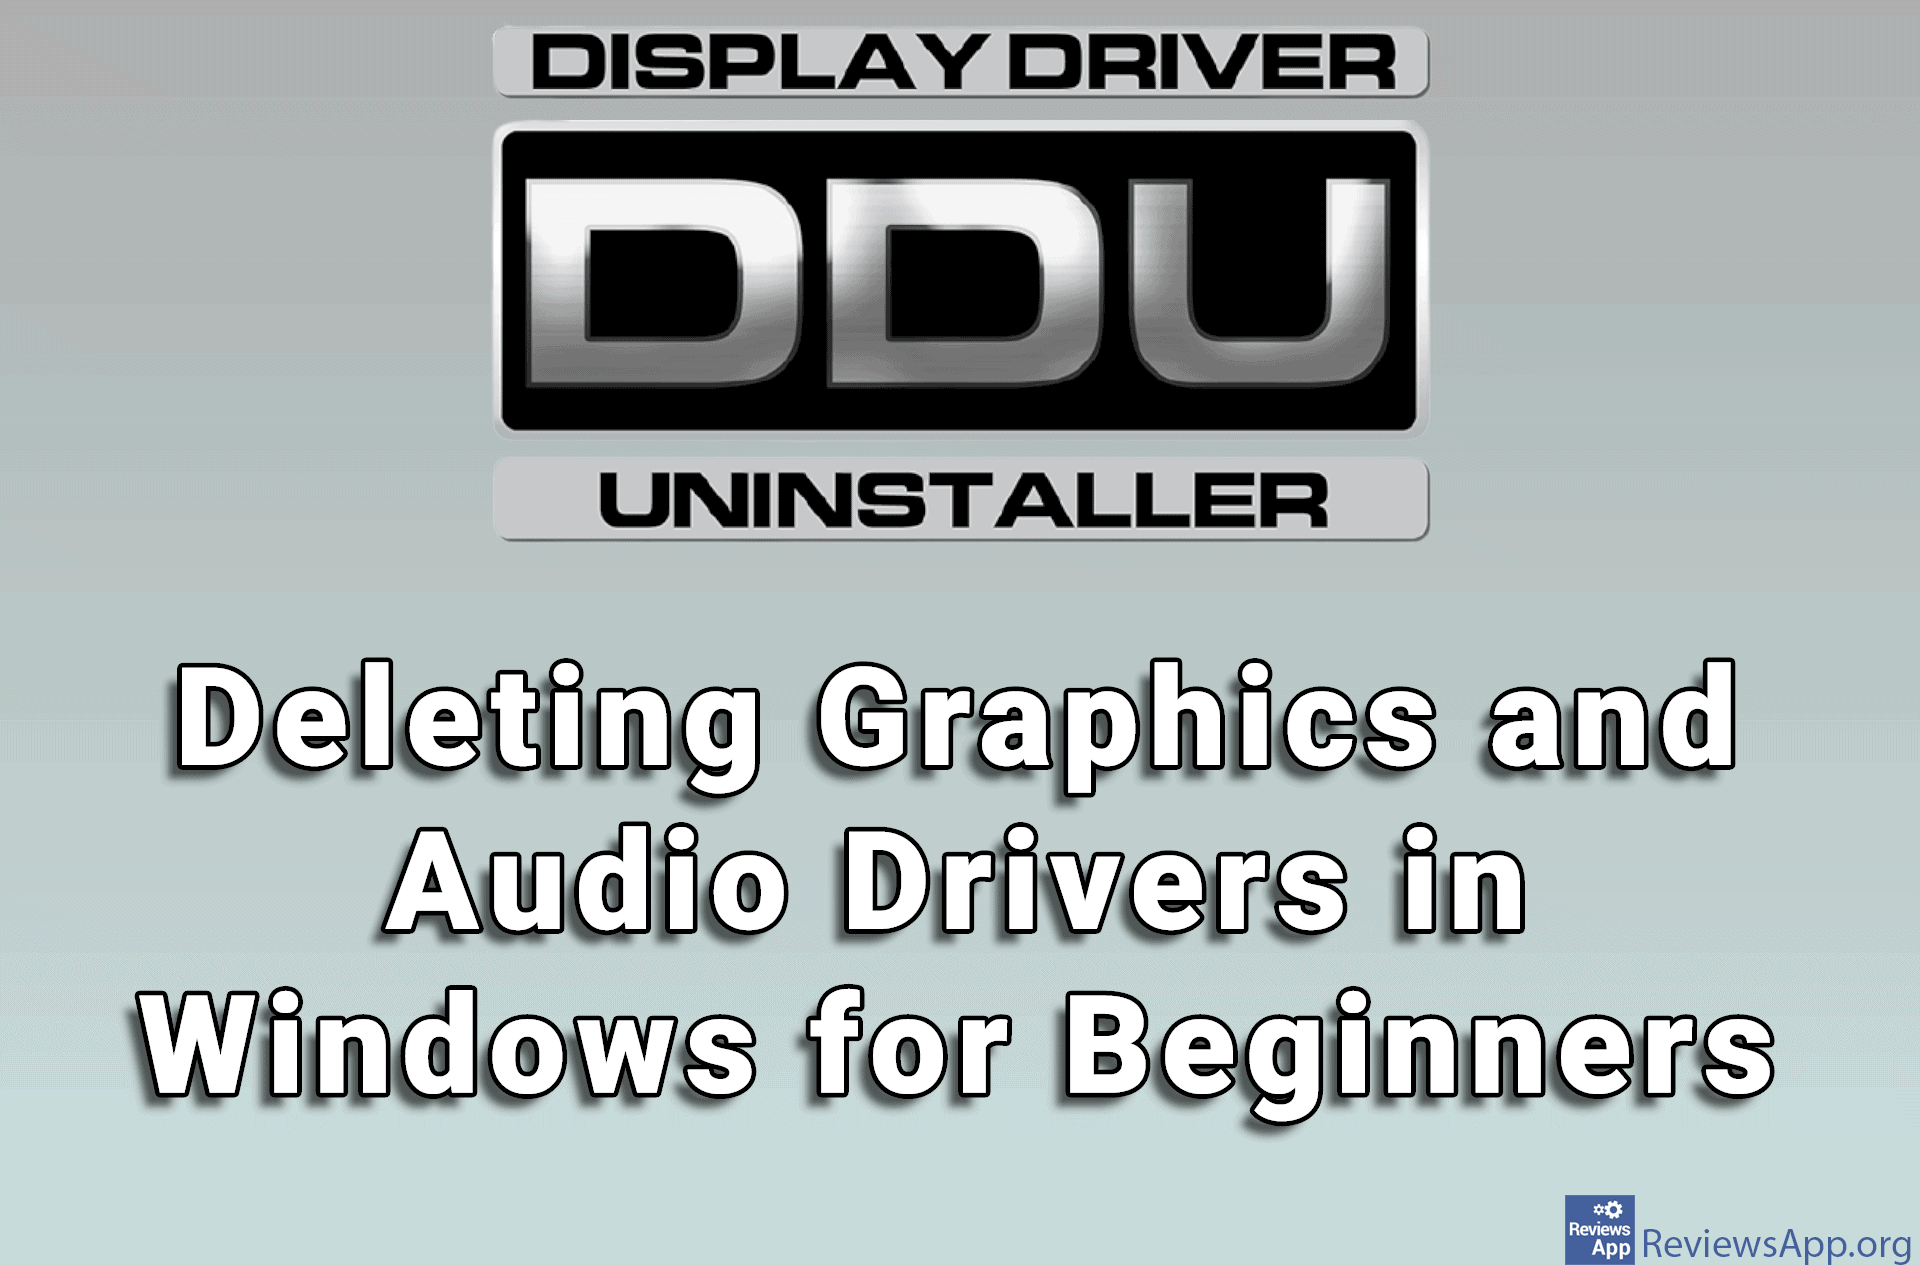 Display Driver Uninstaller – Deleting Graphics and Audio Drivers in Windows for Beginners